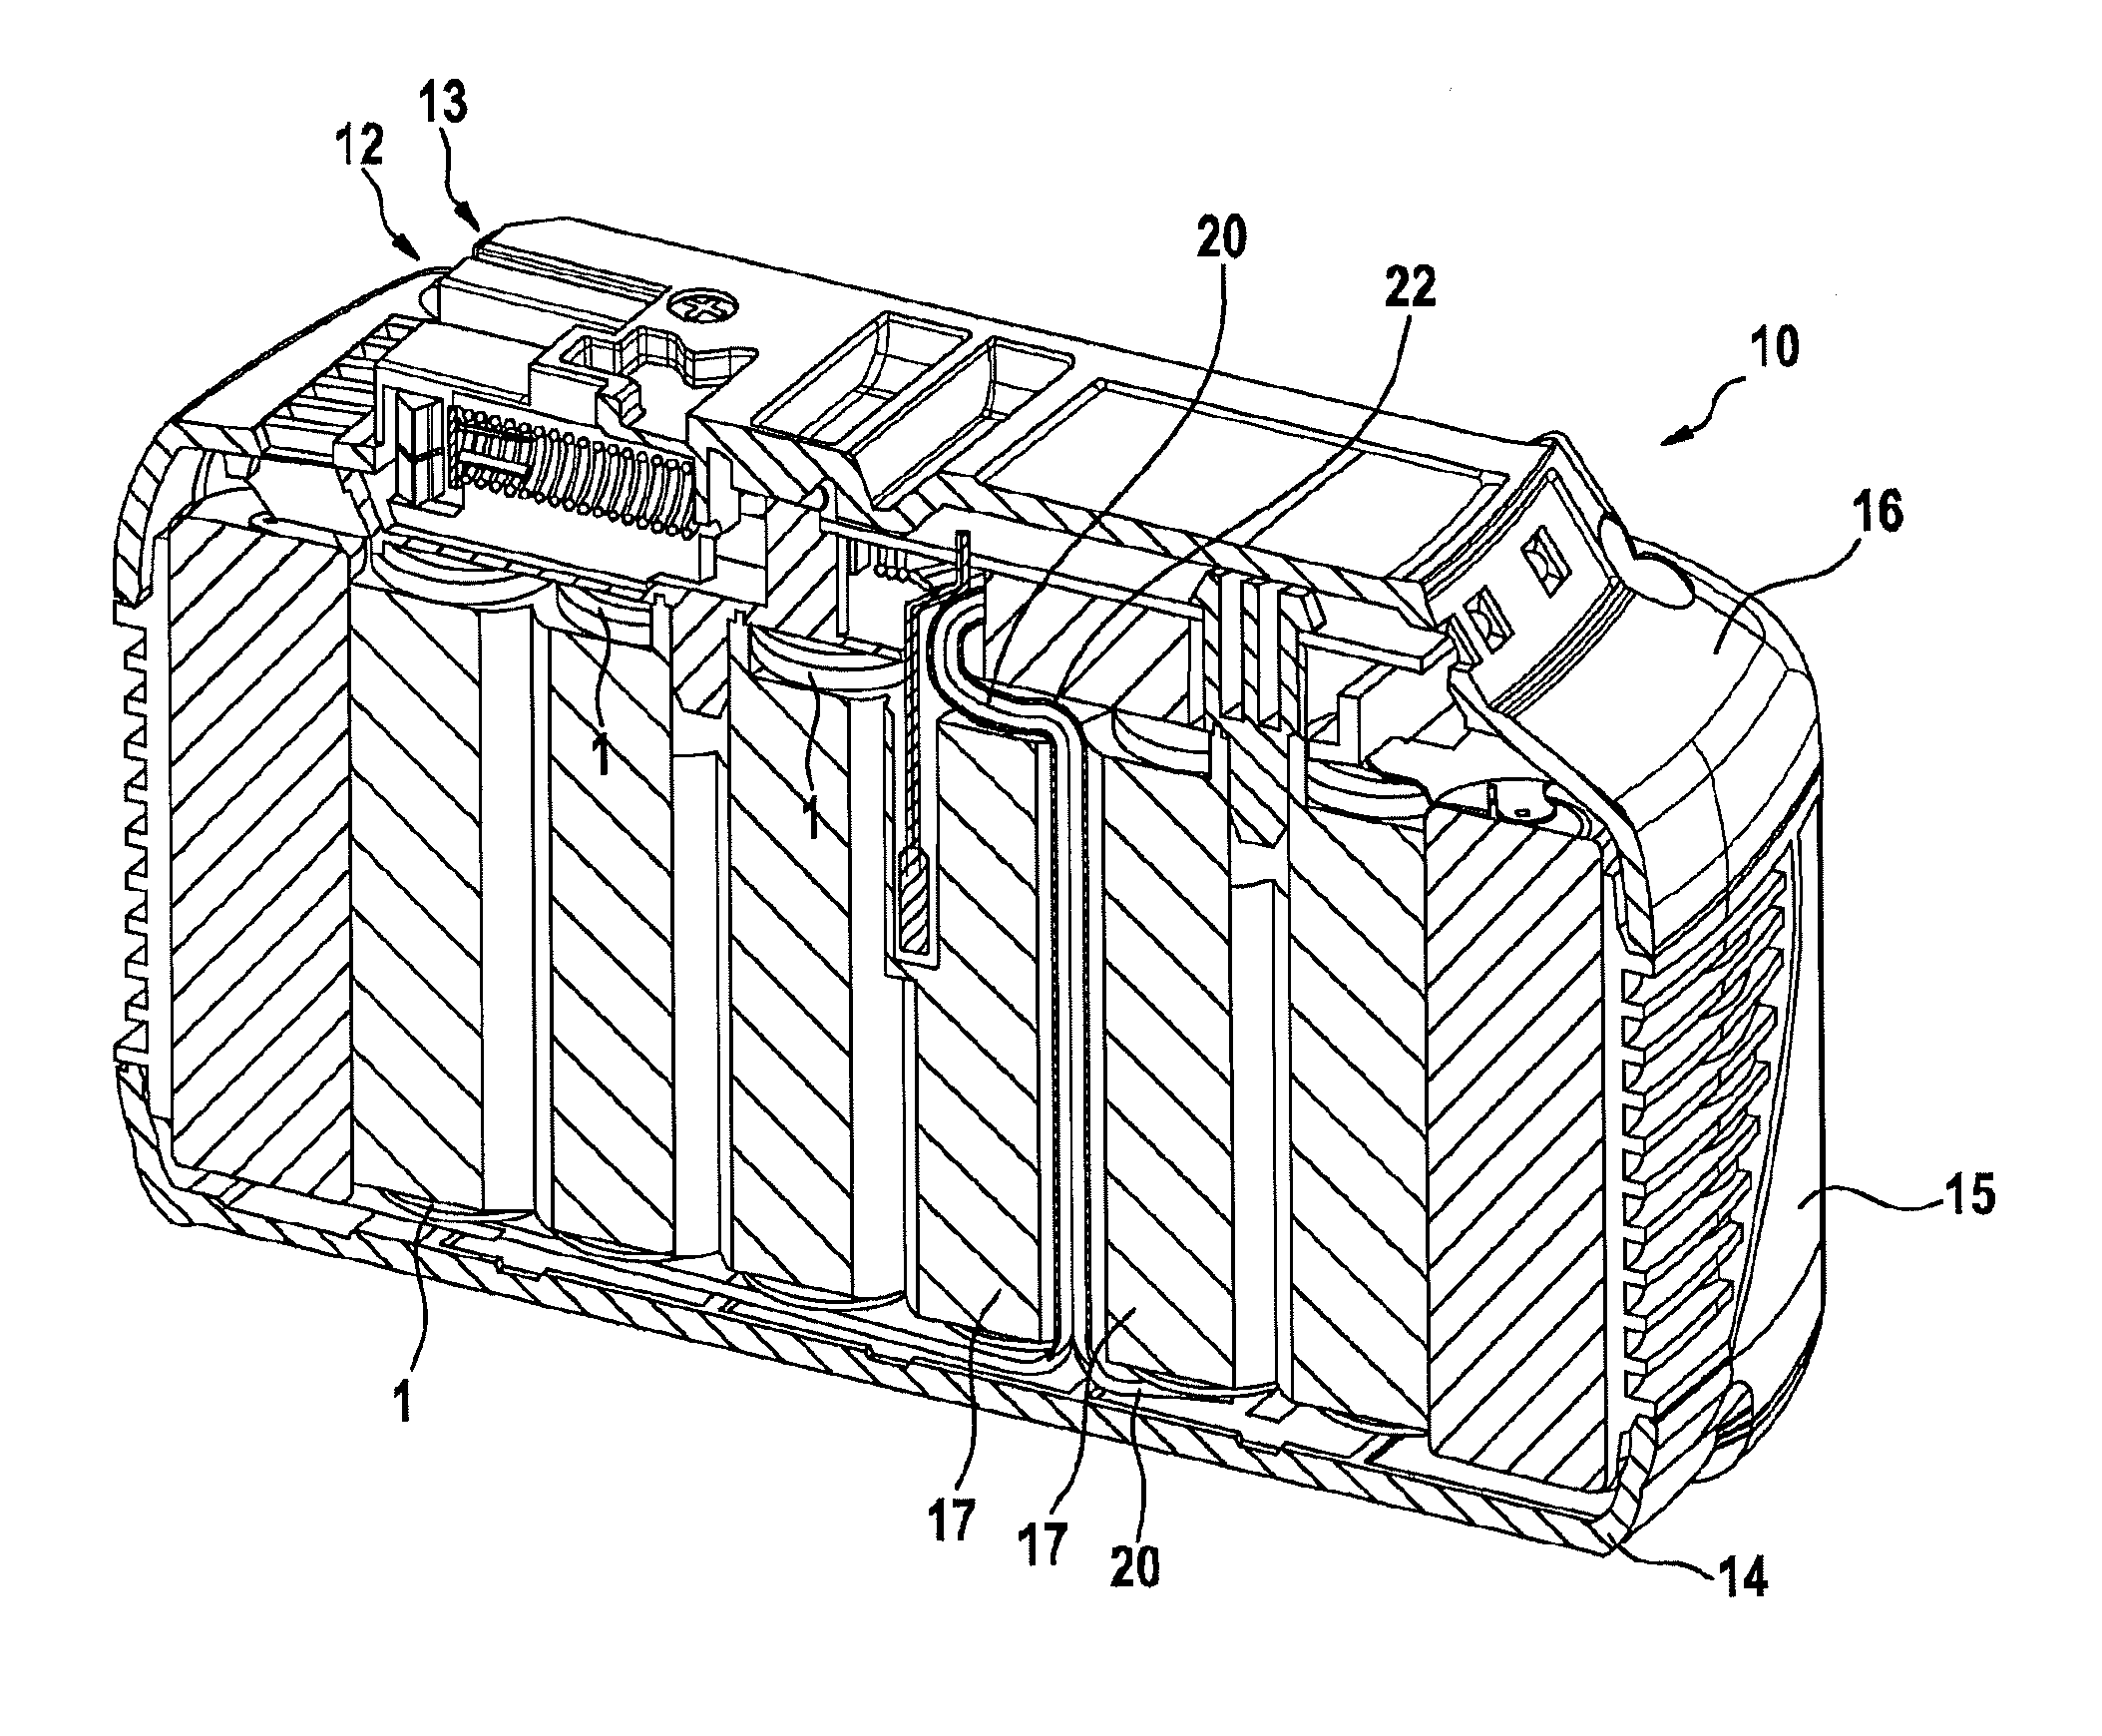 Housing for accommodating at least one rechargeable battery cell